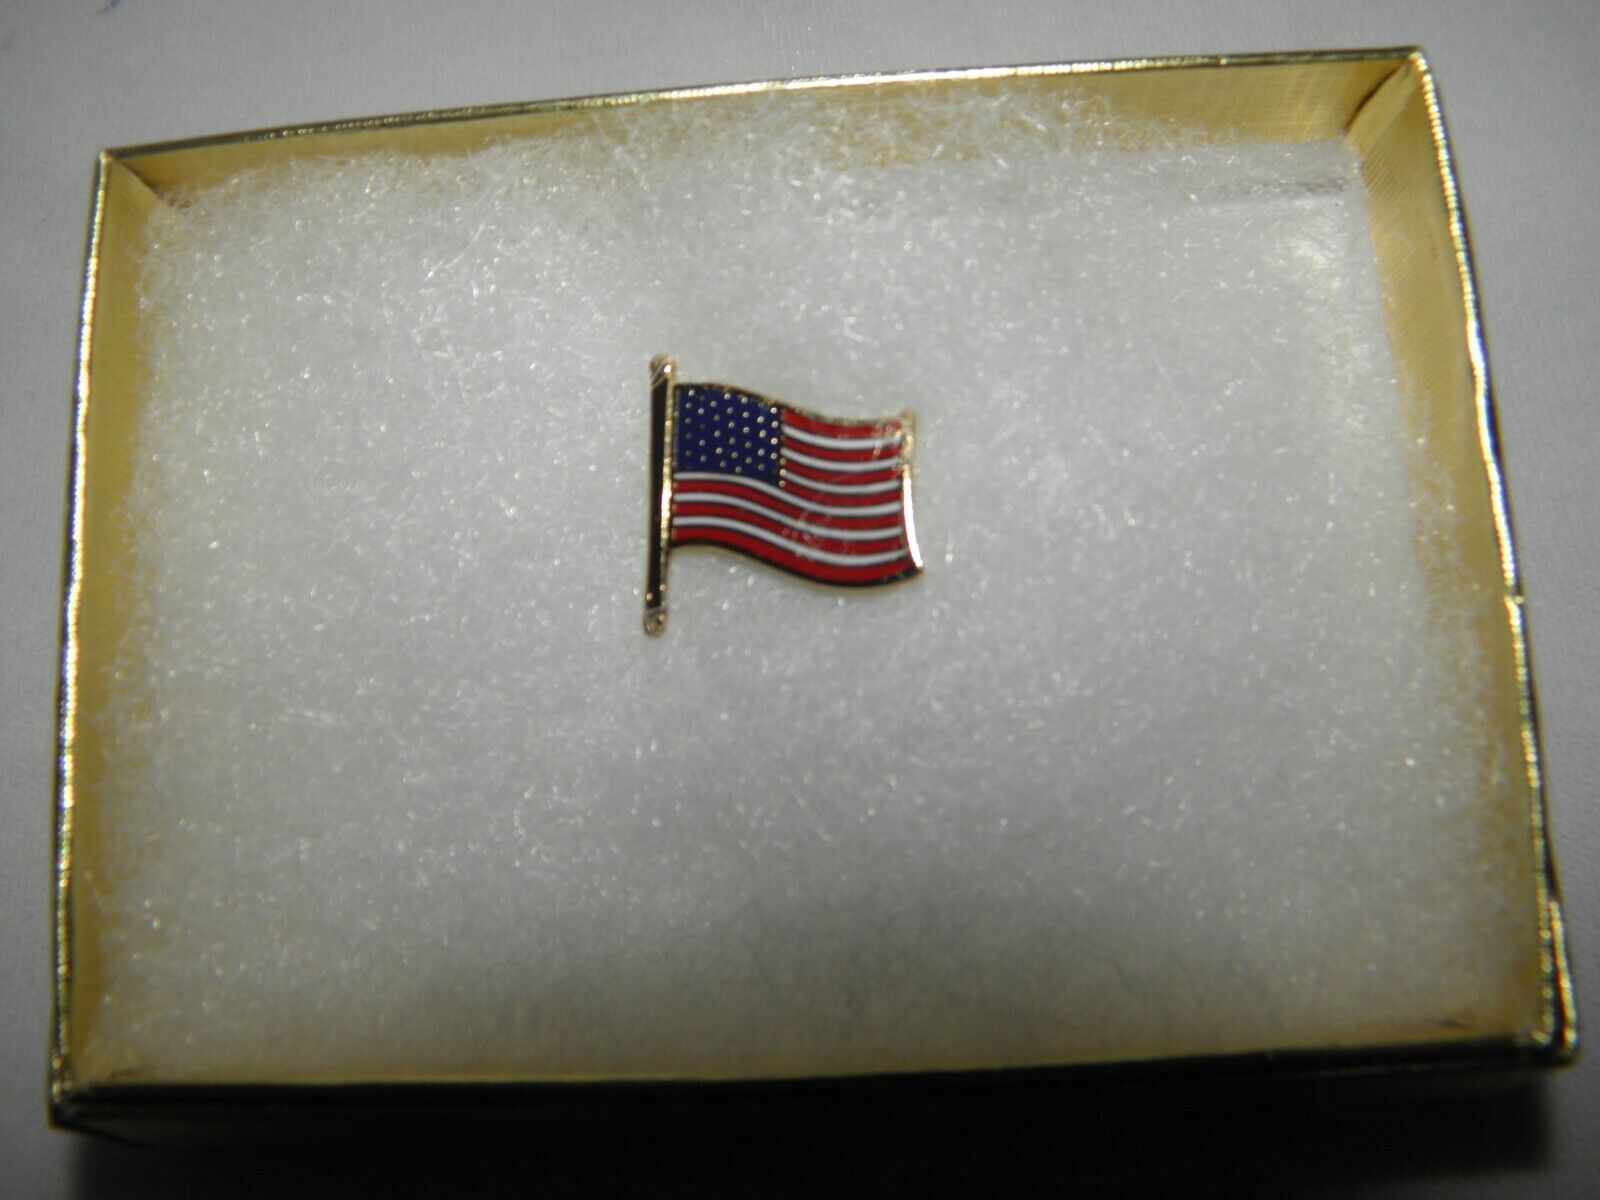 USA FLAG PIN DEMOCRAT REPUBLICAN PATRIOTIC CONSERVATIVE SMALL PIN TO WEAR DAILY 